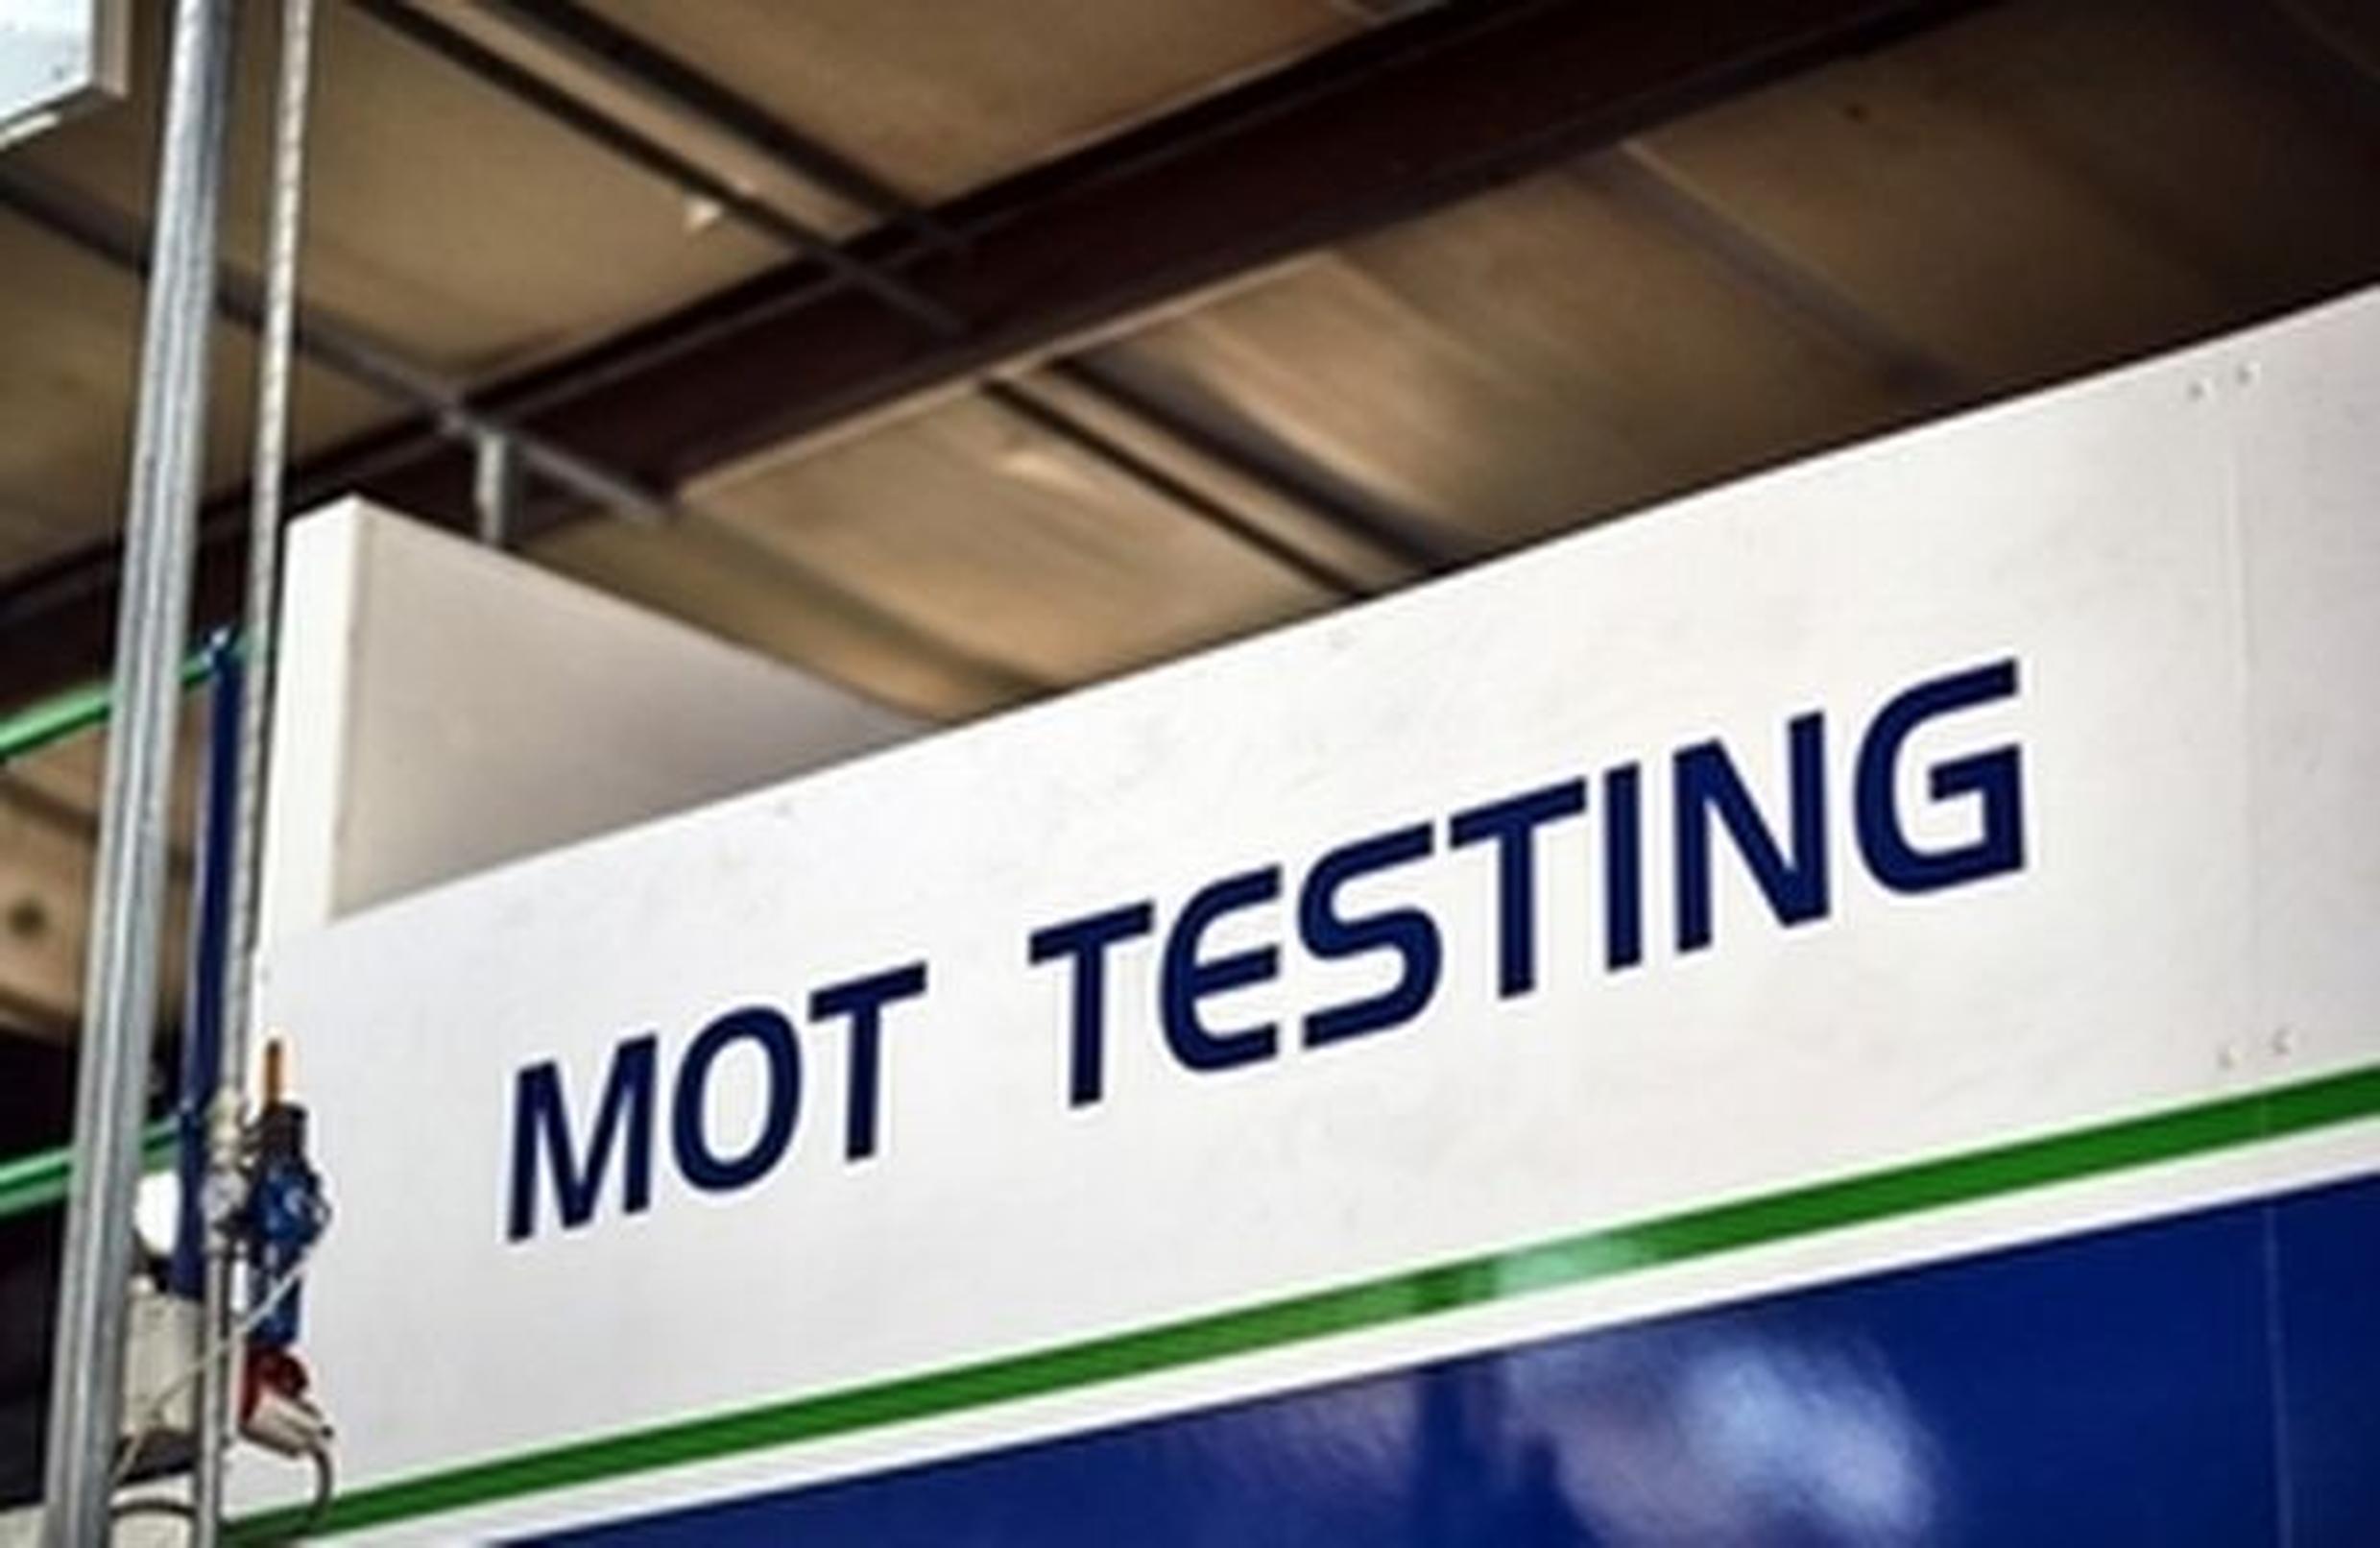 Rise of electric vehicles prompts MOT reform consultation